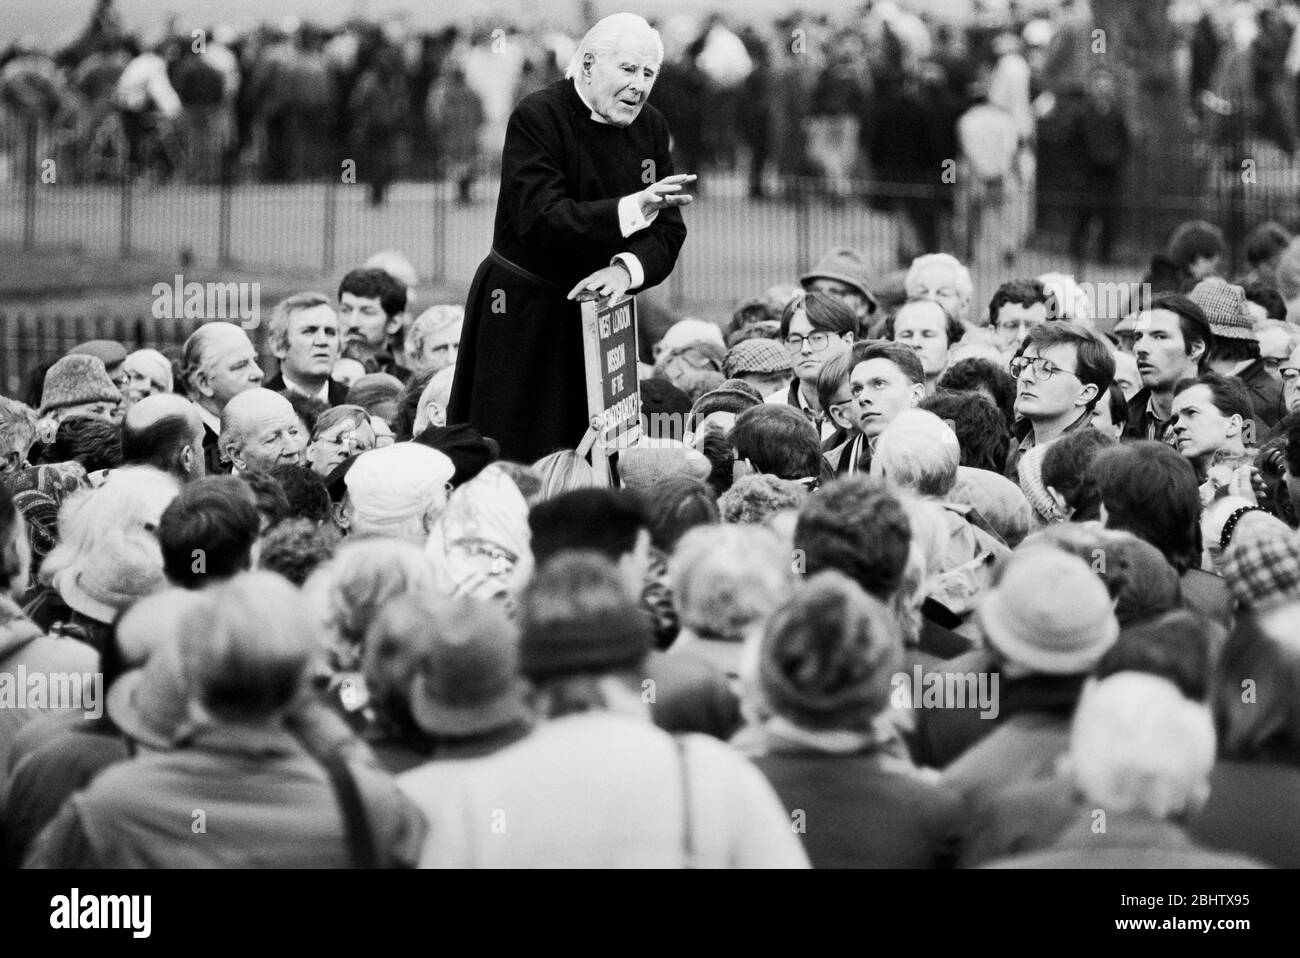 Lord Soper speaking at Speakers' Corner, Hyde Park, London, UK in the early 1990s. Stock Photo